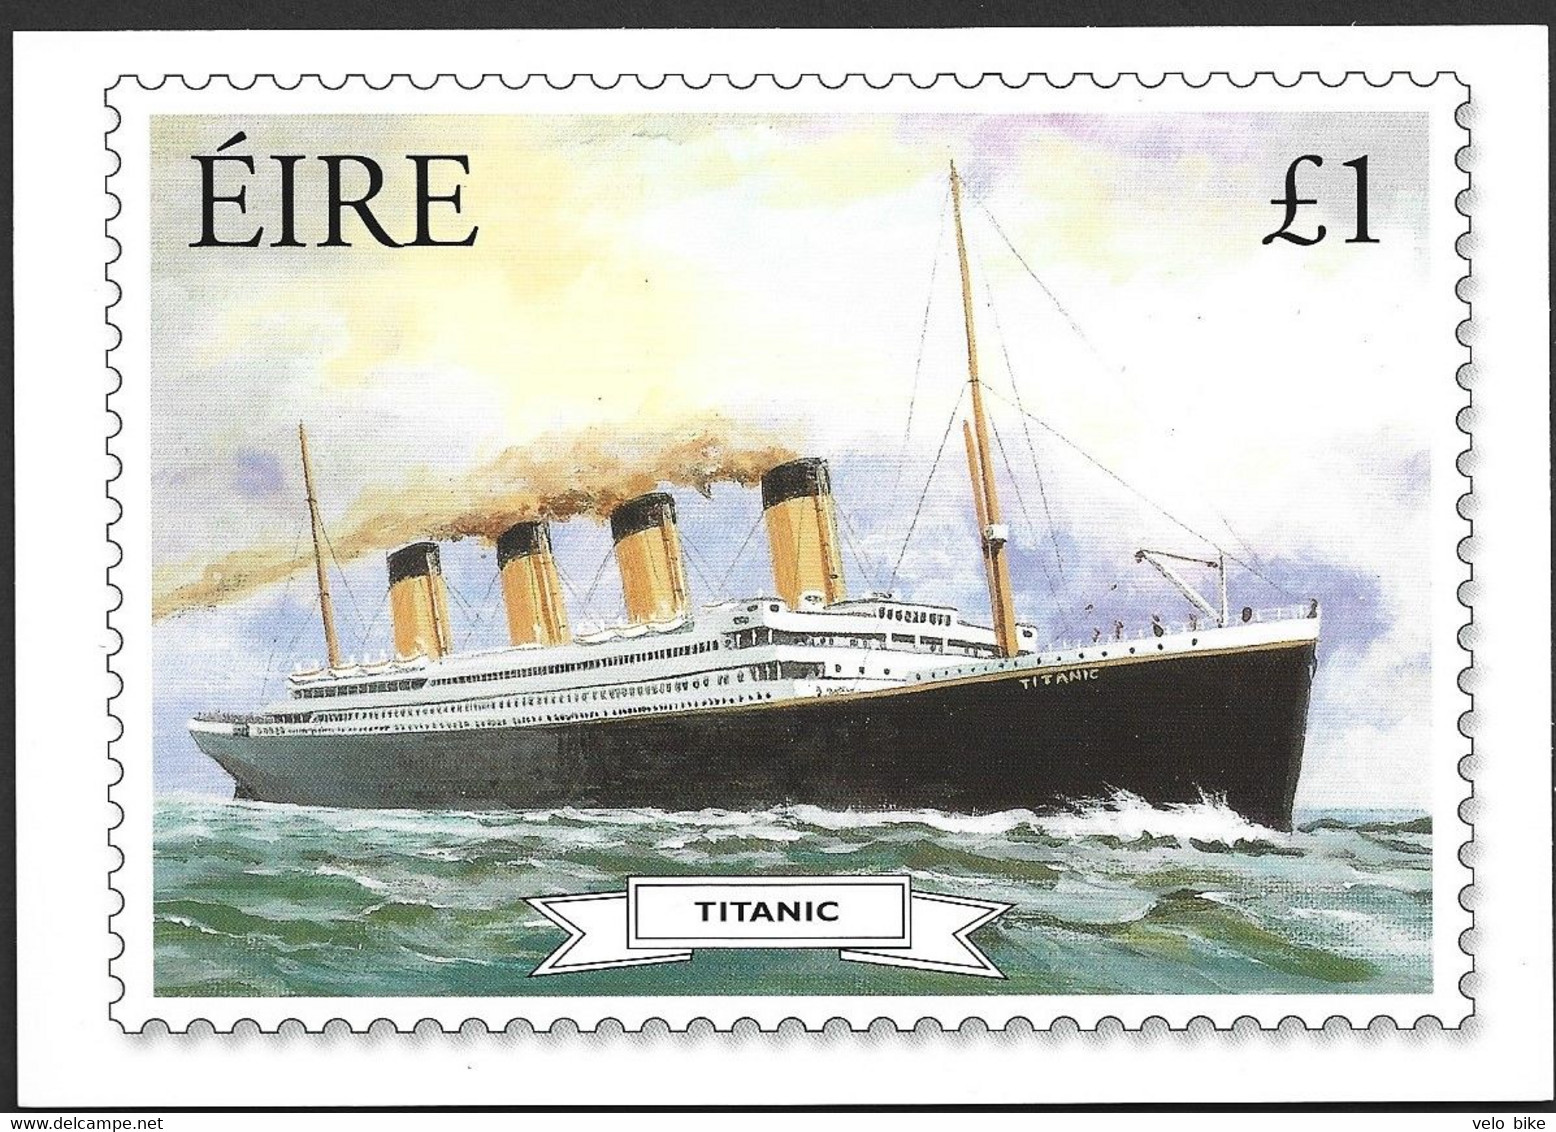 Eire Ireland Postal Stationery Postage Paid Cork 2005 Titanic Ocean Liner Ferry Boat  Priotaire Airmail - Postal Stationery